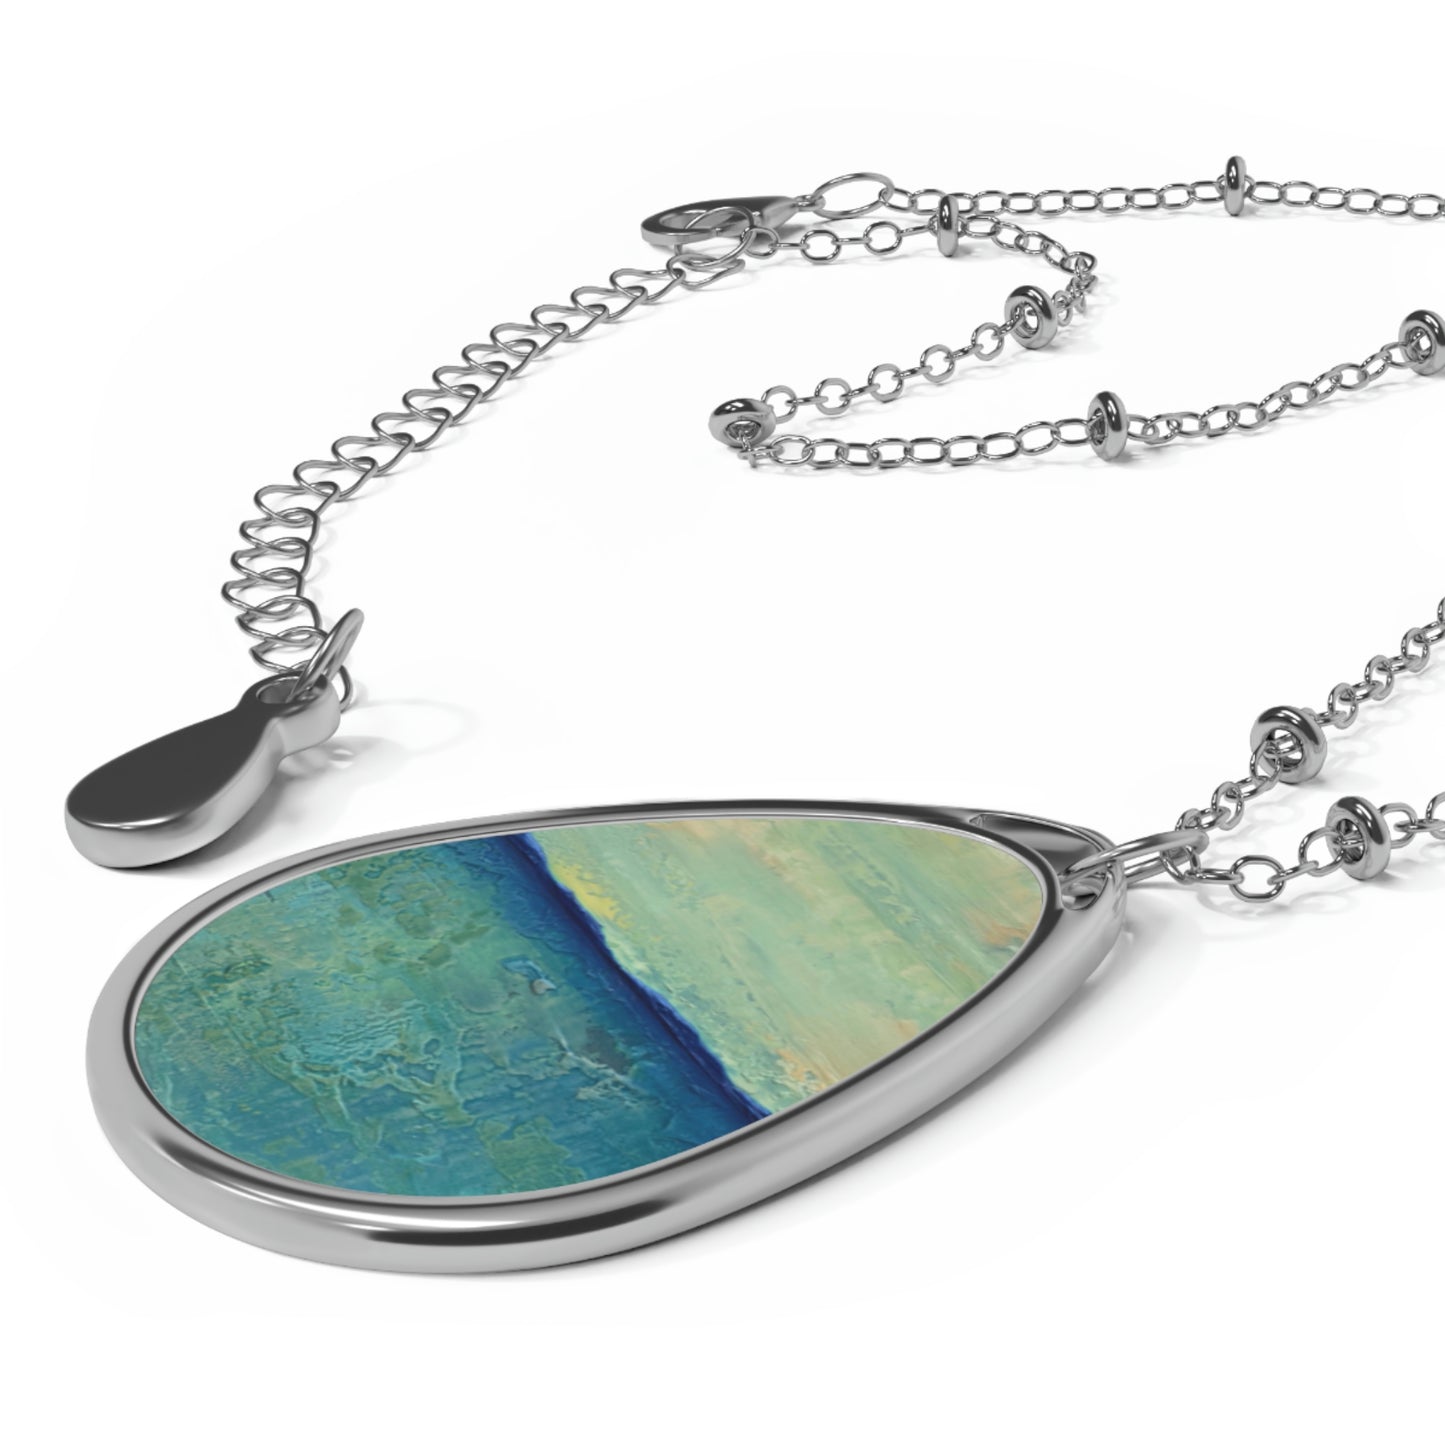 Art Necklace - Free-floating